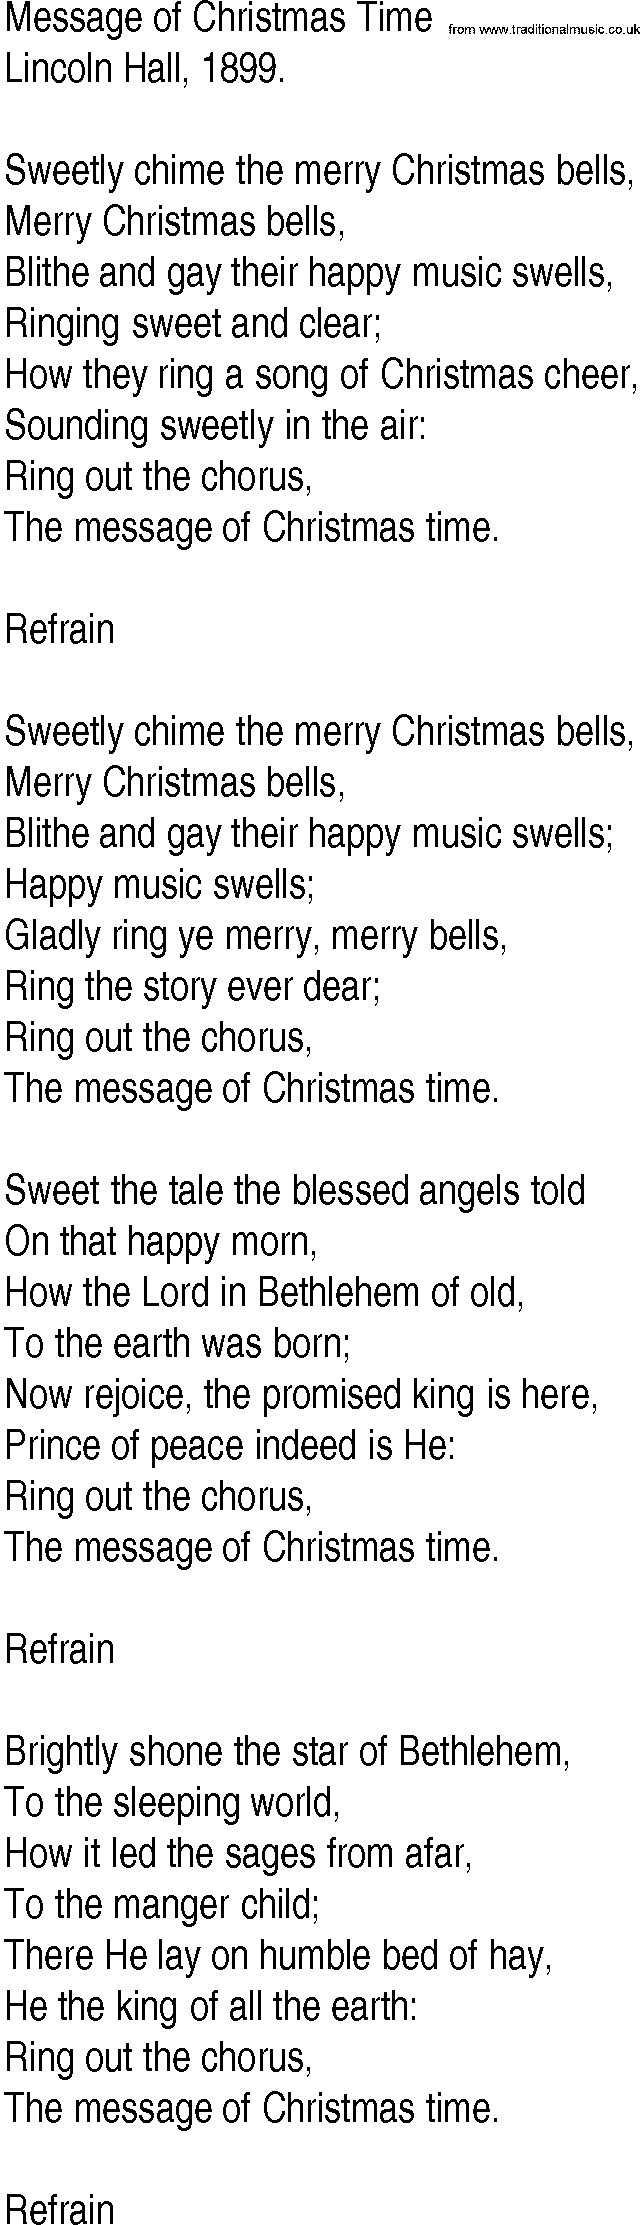 Hymn and Gospel Song: Message of Christmas Time by Lincoln Hall lyrics